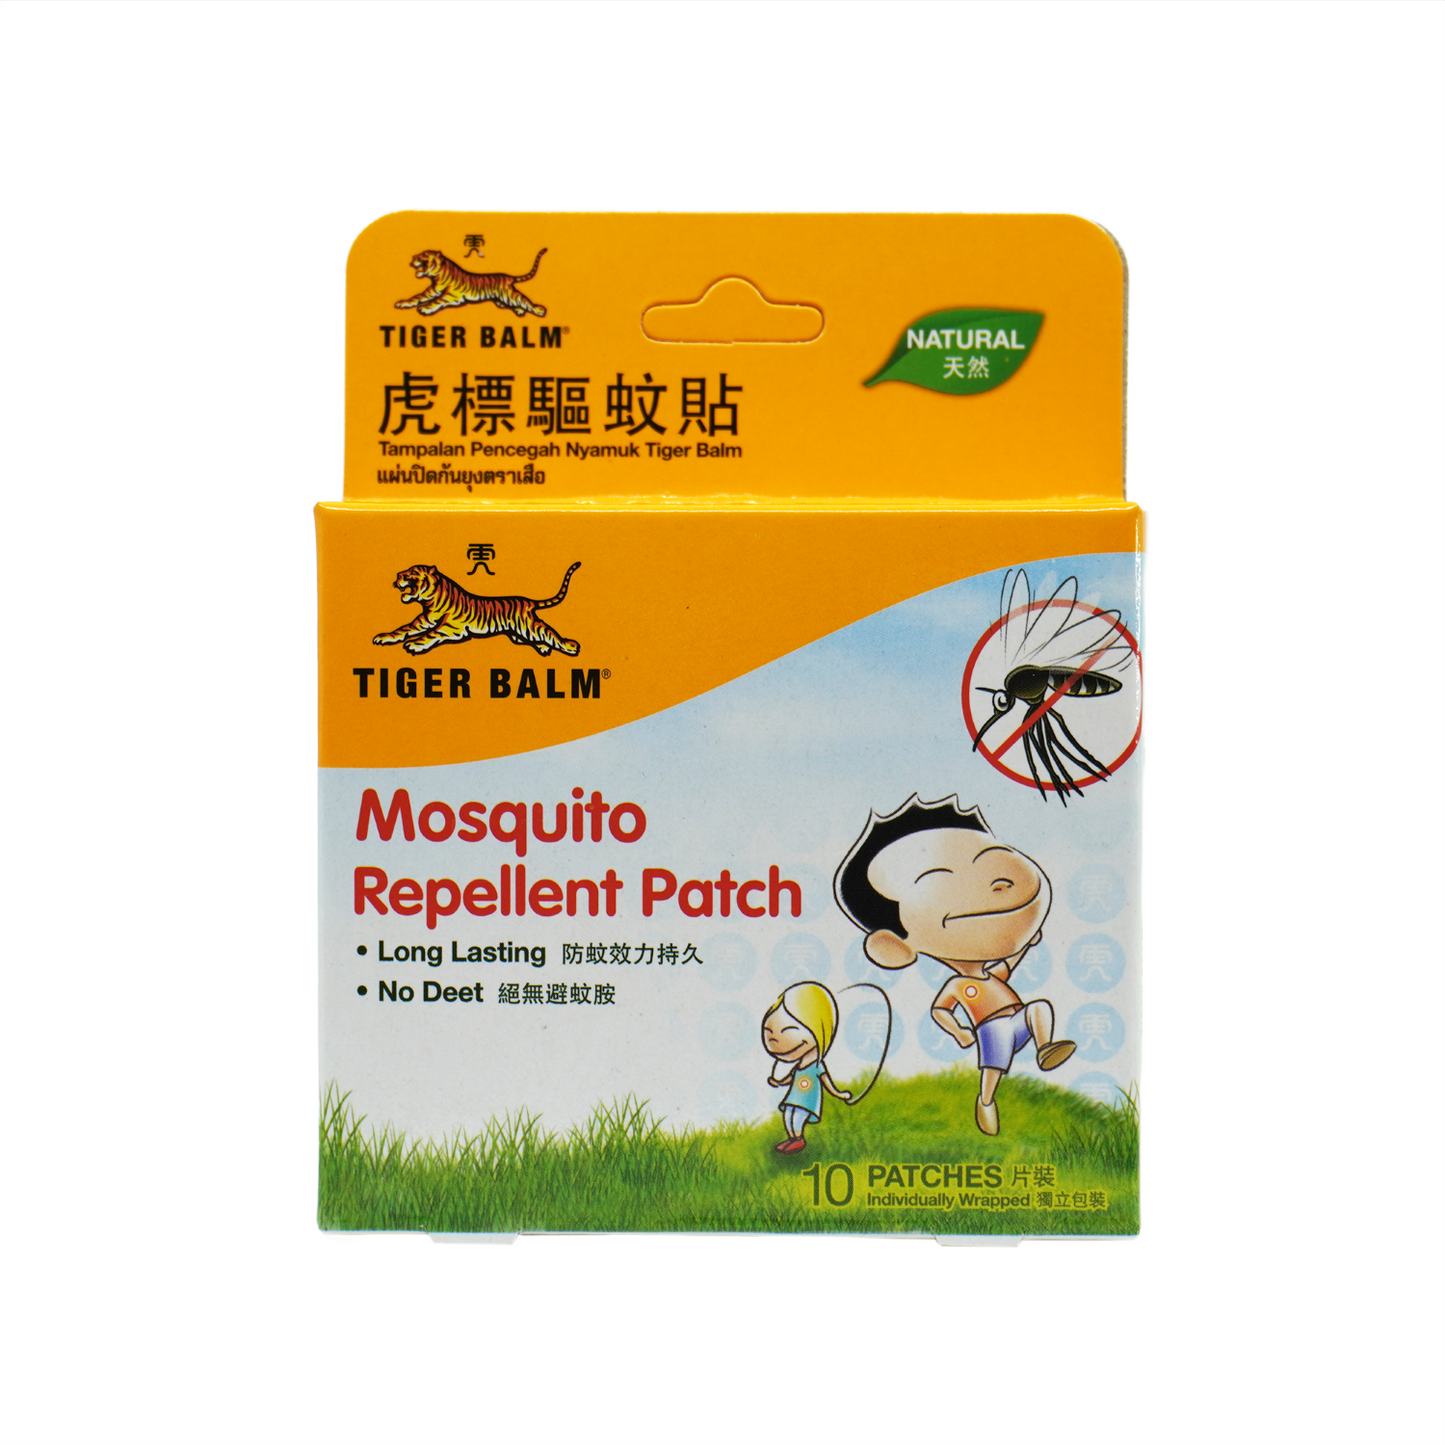 Tiger Balm Mosquito Repellent Patch 20's